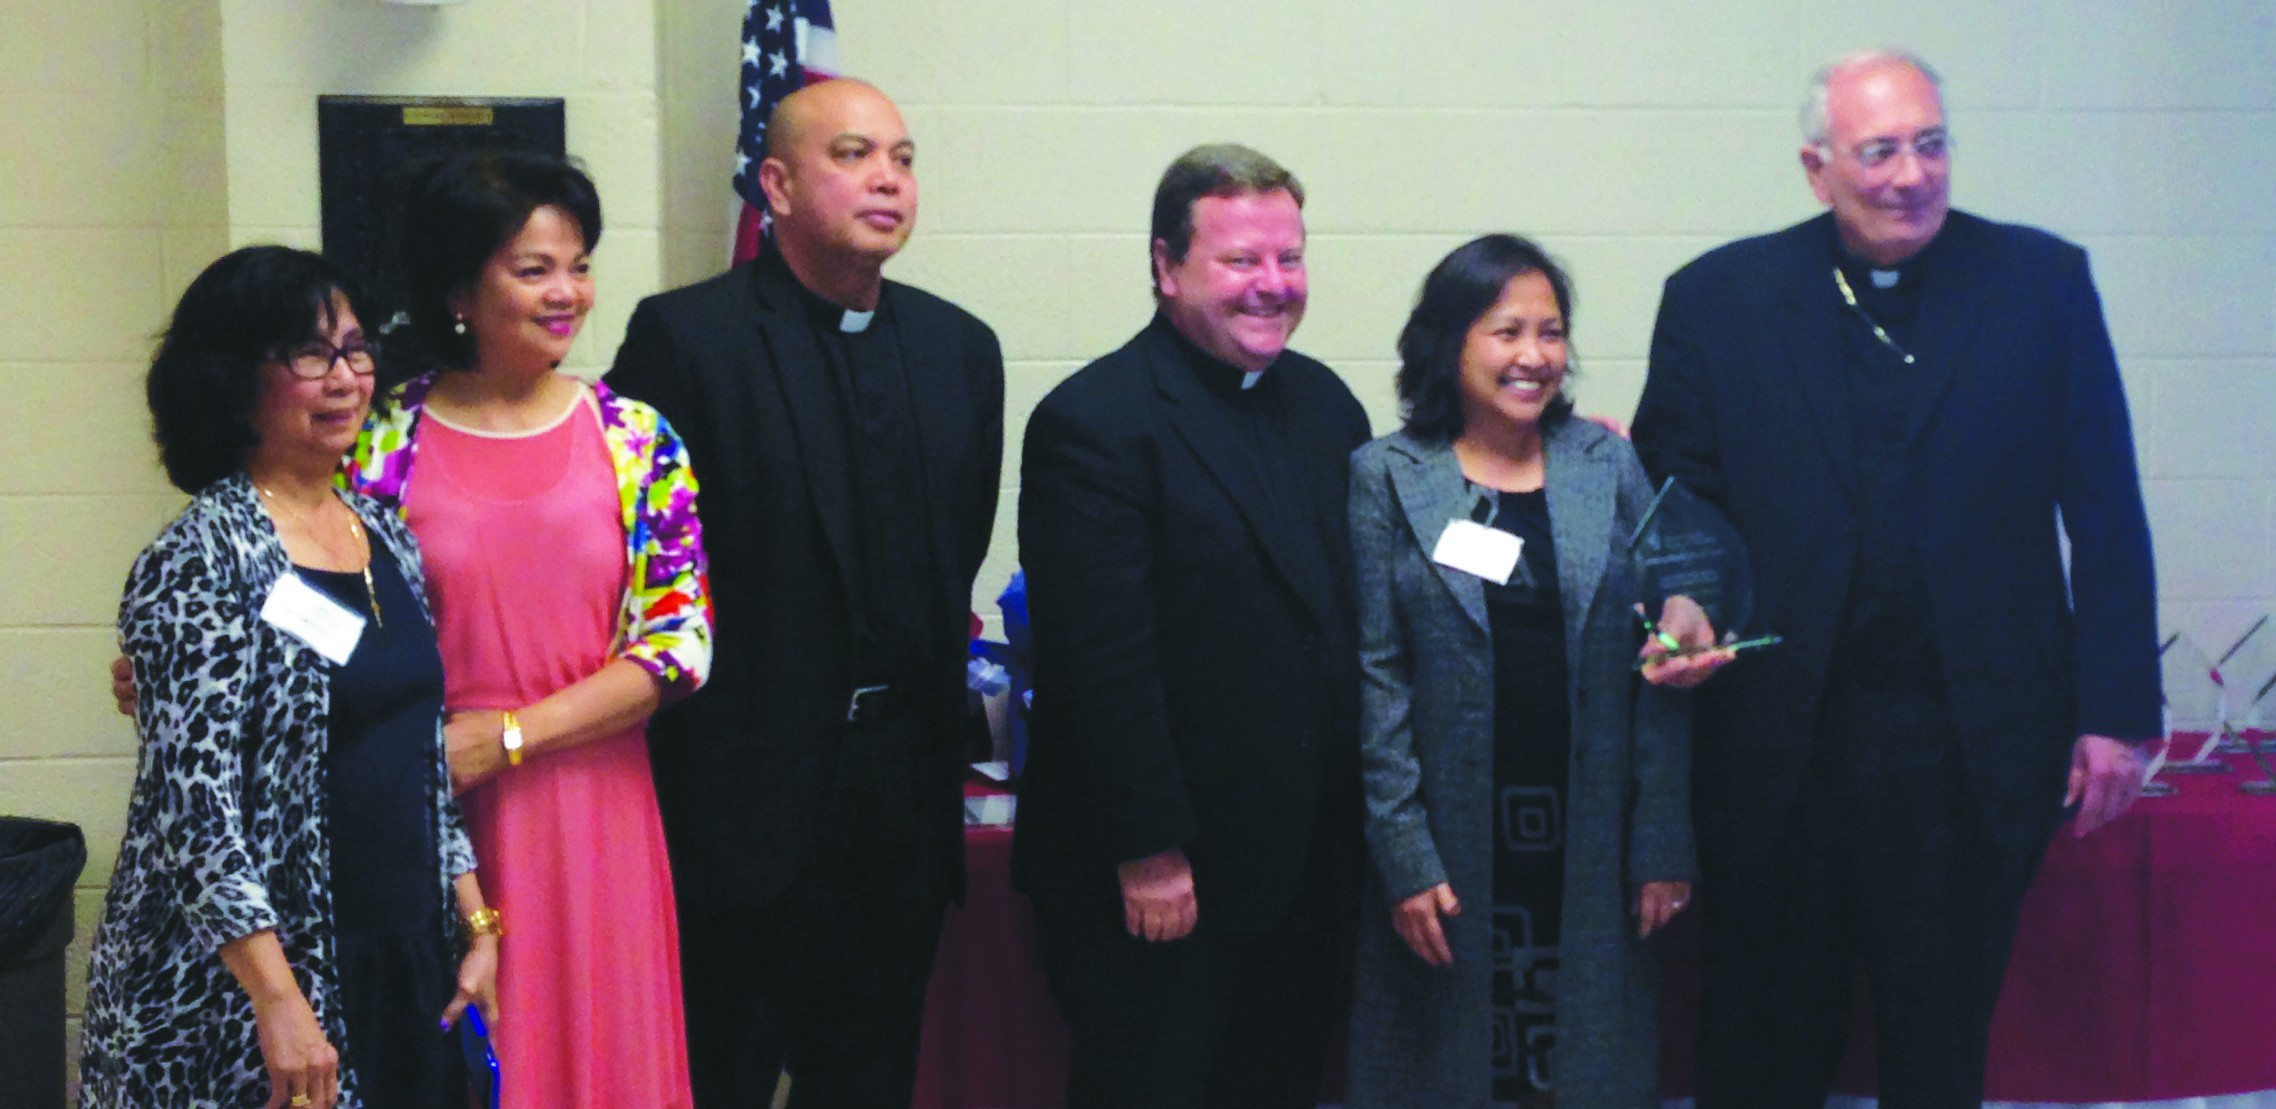  Bishop Nicholas DiMarzio congratulates the parishioners of Our Lady of the Snows Church, N. Floral Park, and Father Kevin F. McBrien, pastor, third from right, on ranking among the top Queens parishes for blood donation collections. 